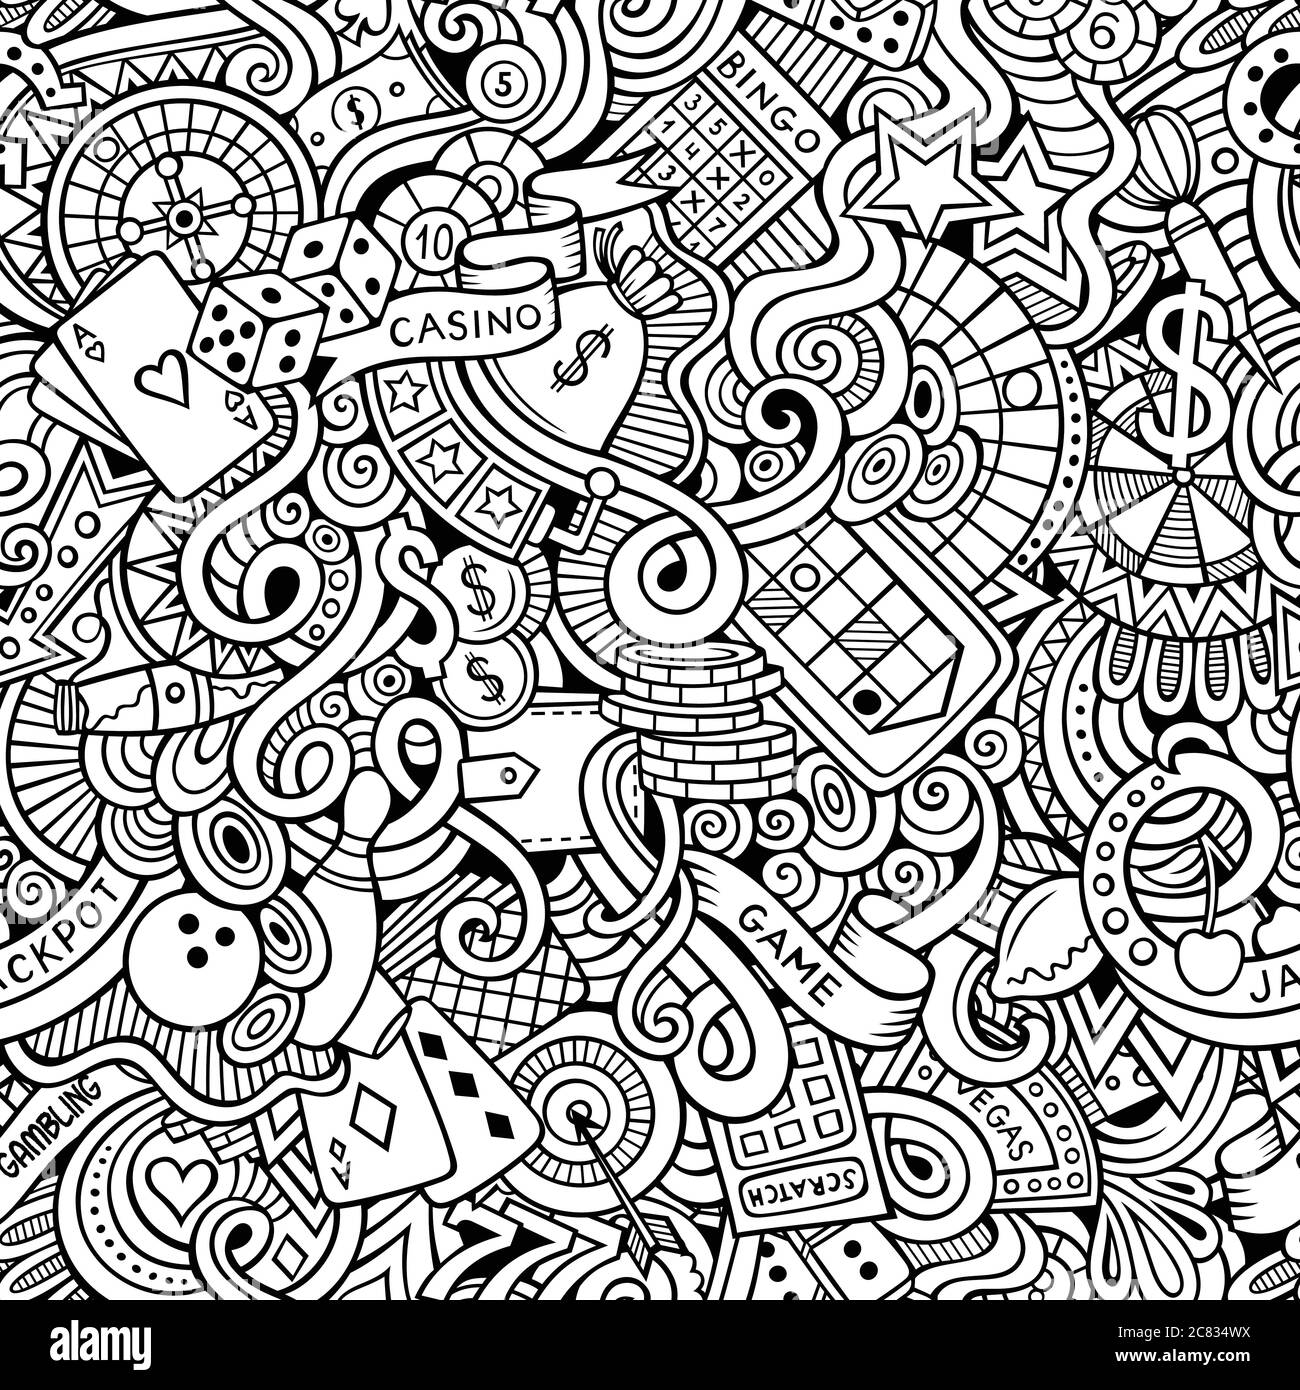 Cartoon hand-drawn doodles on the subject of casino style Stock Vector